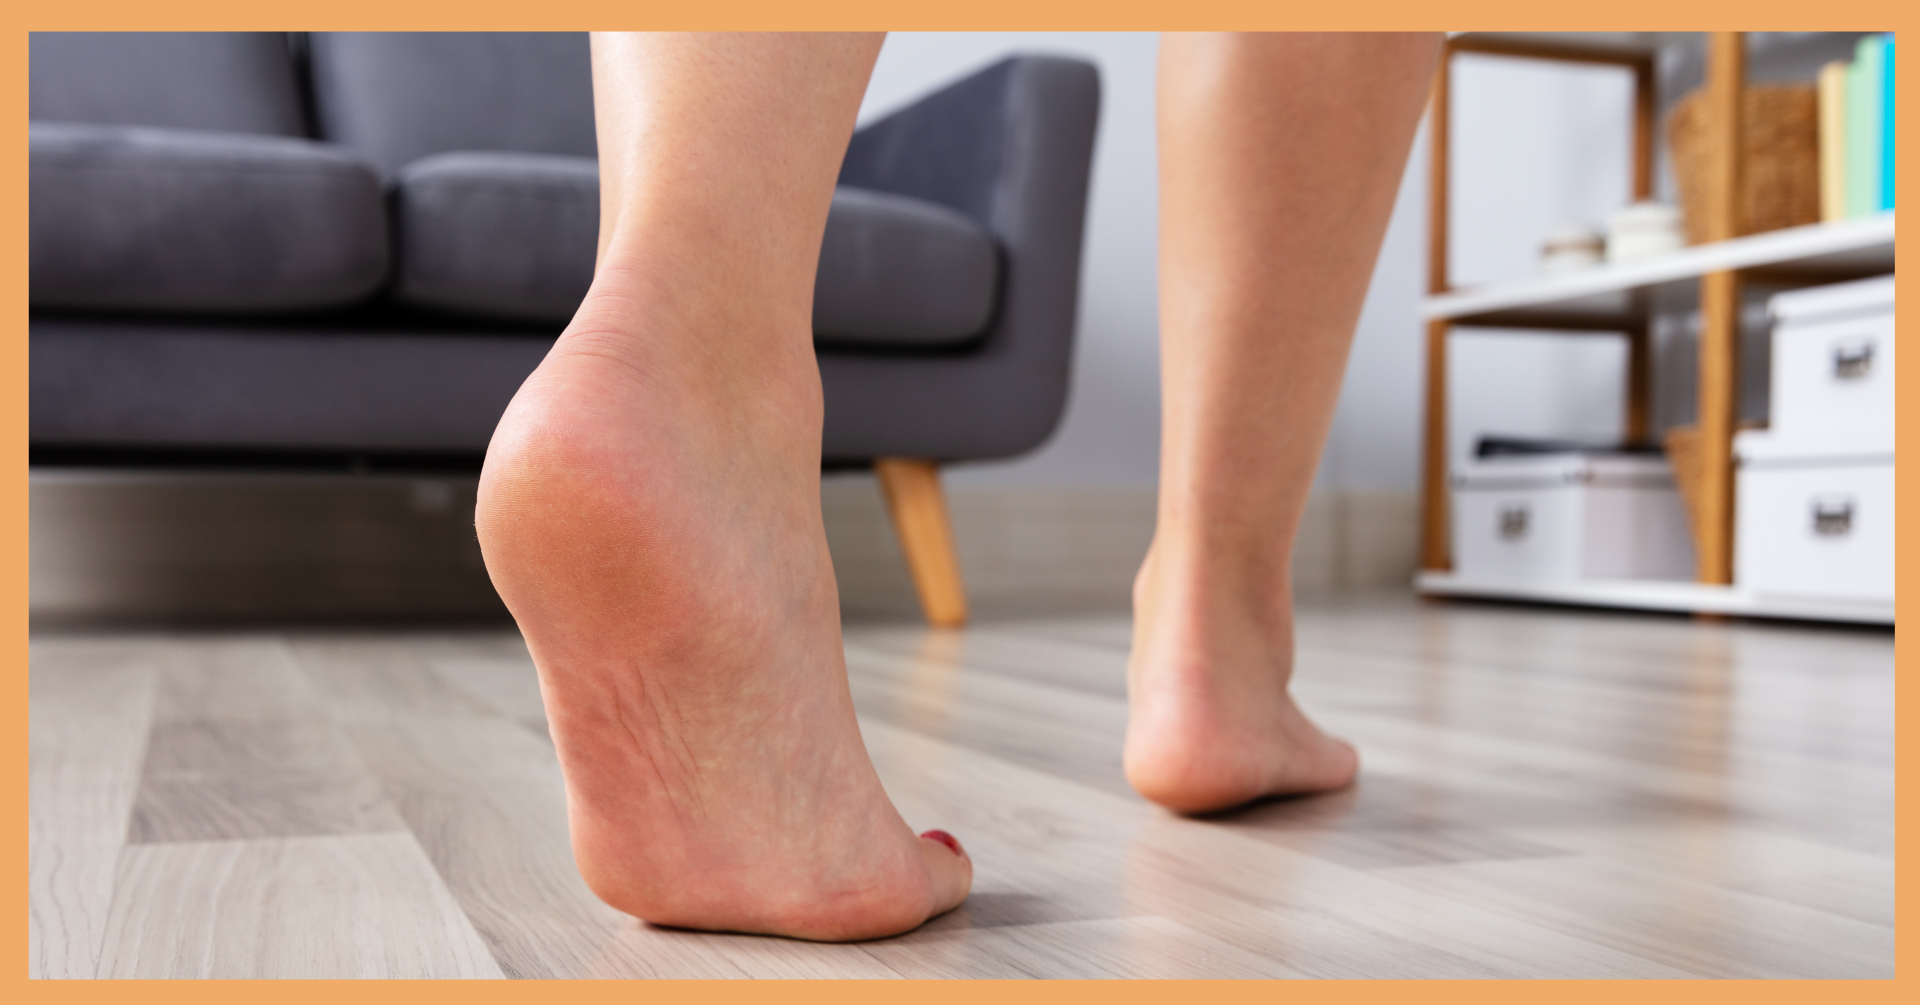 10 home remedies that heal cracked heels in less than a week! | The Times  of India